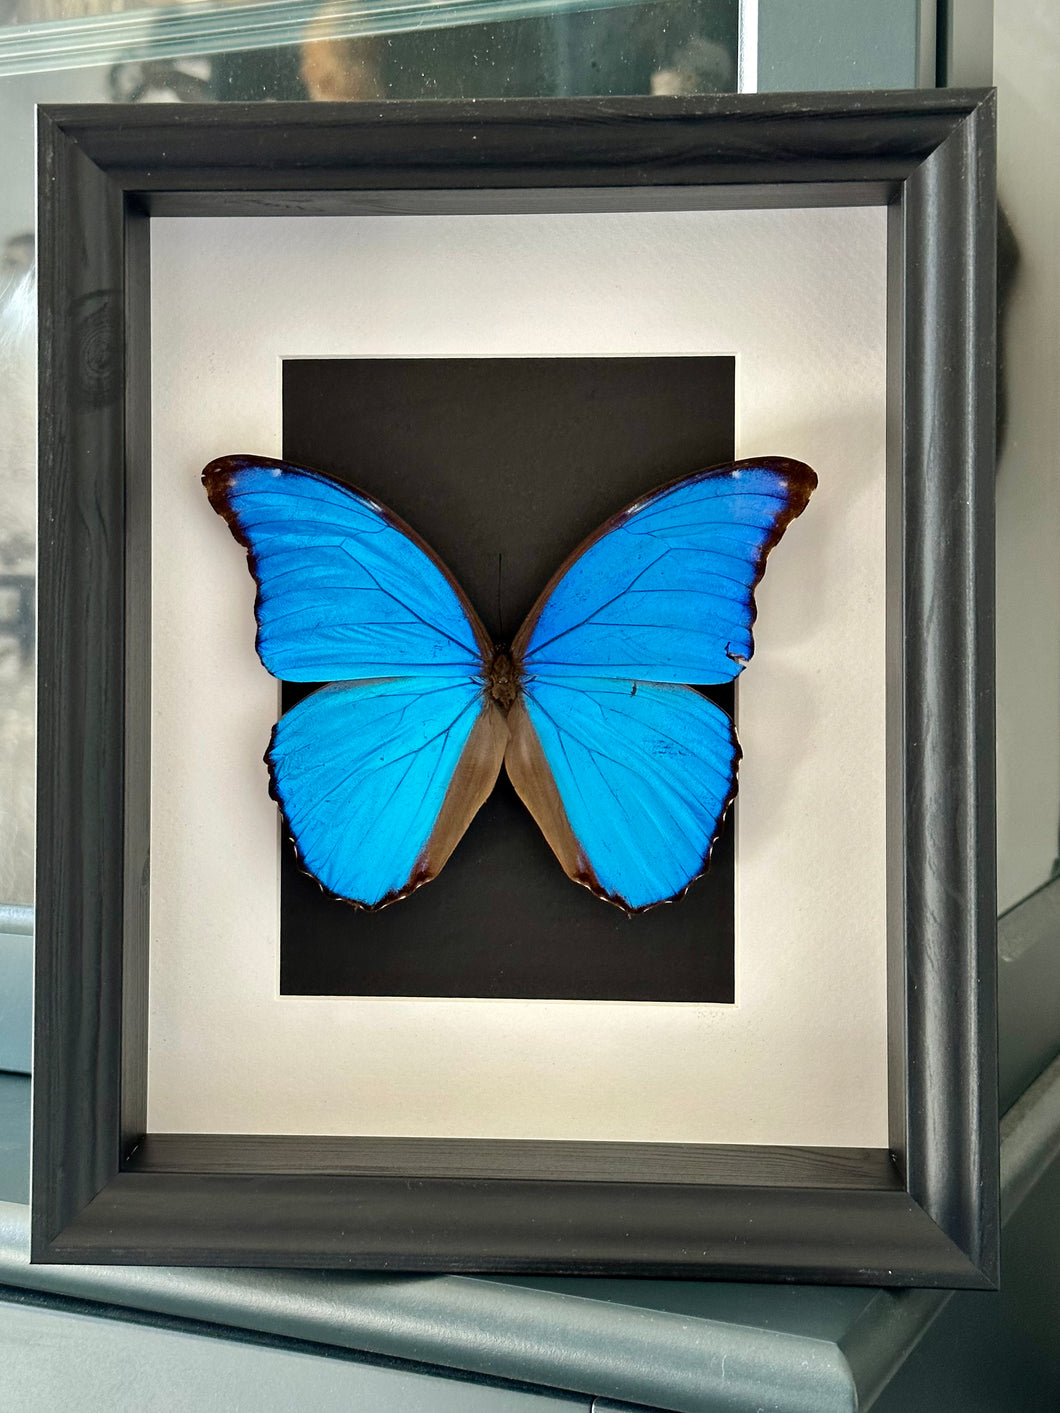 Blue Morpho Butterfly in a frame (A-)